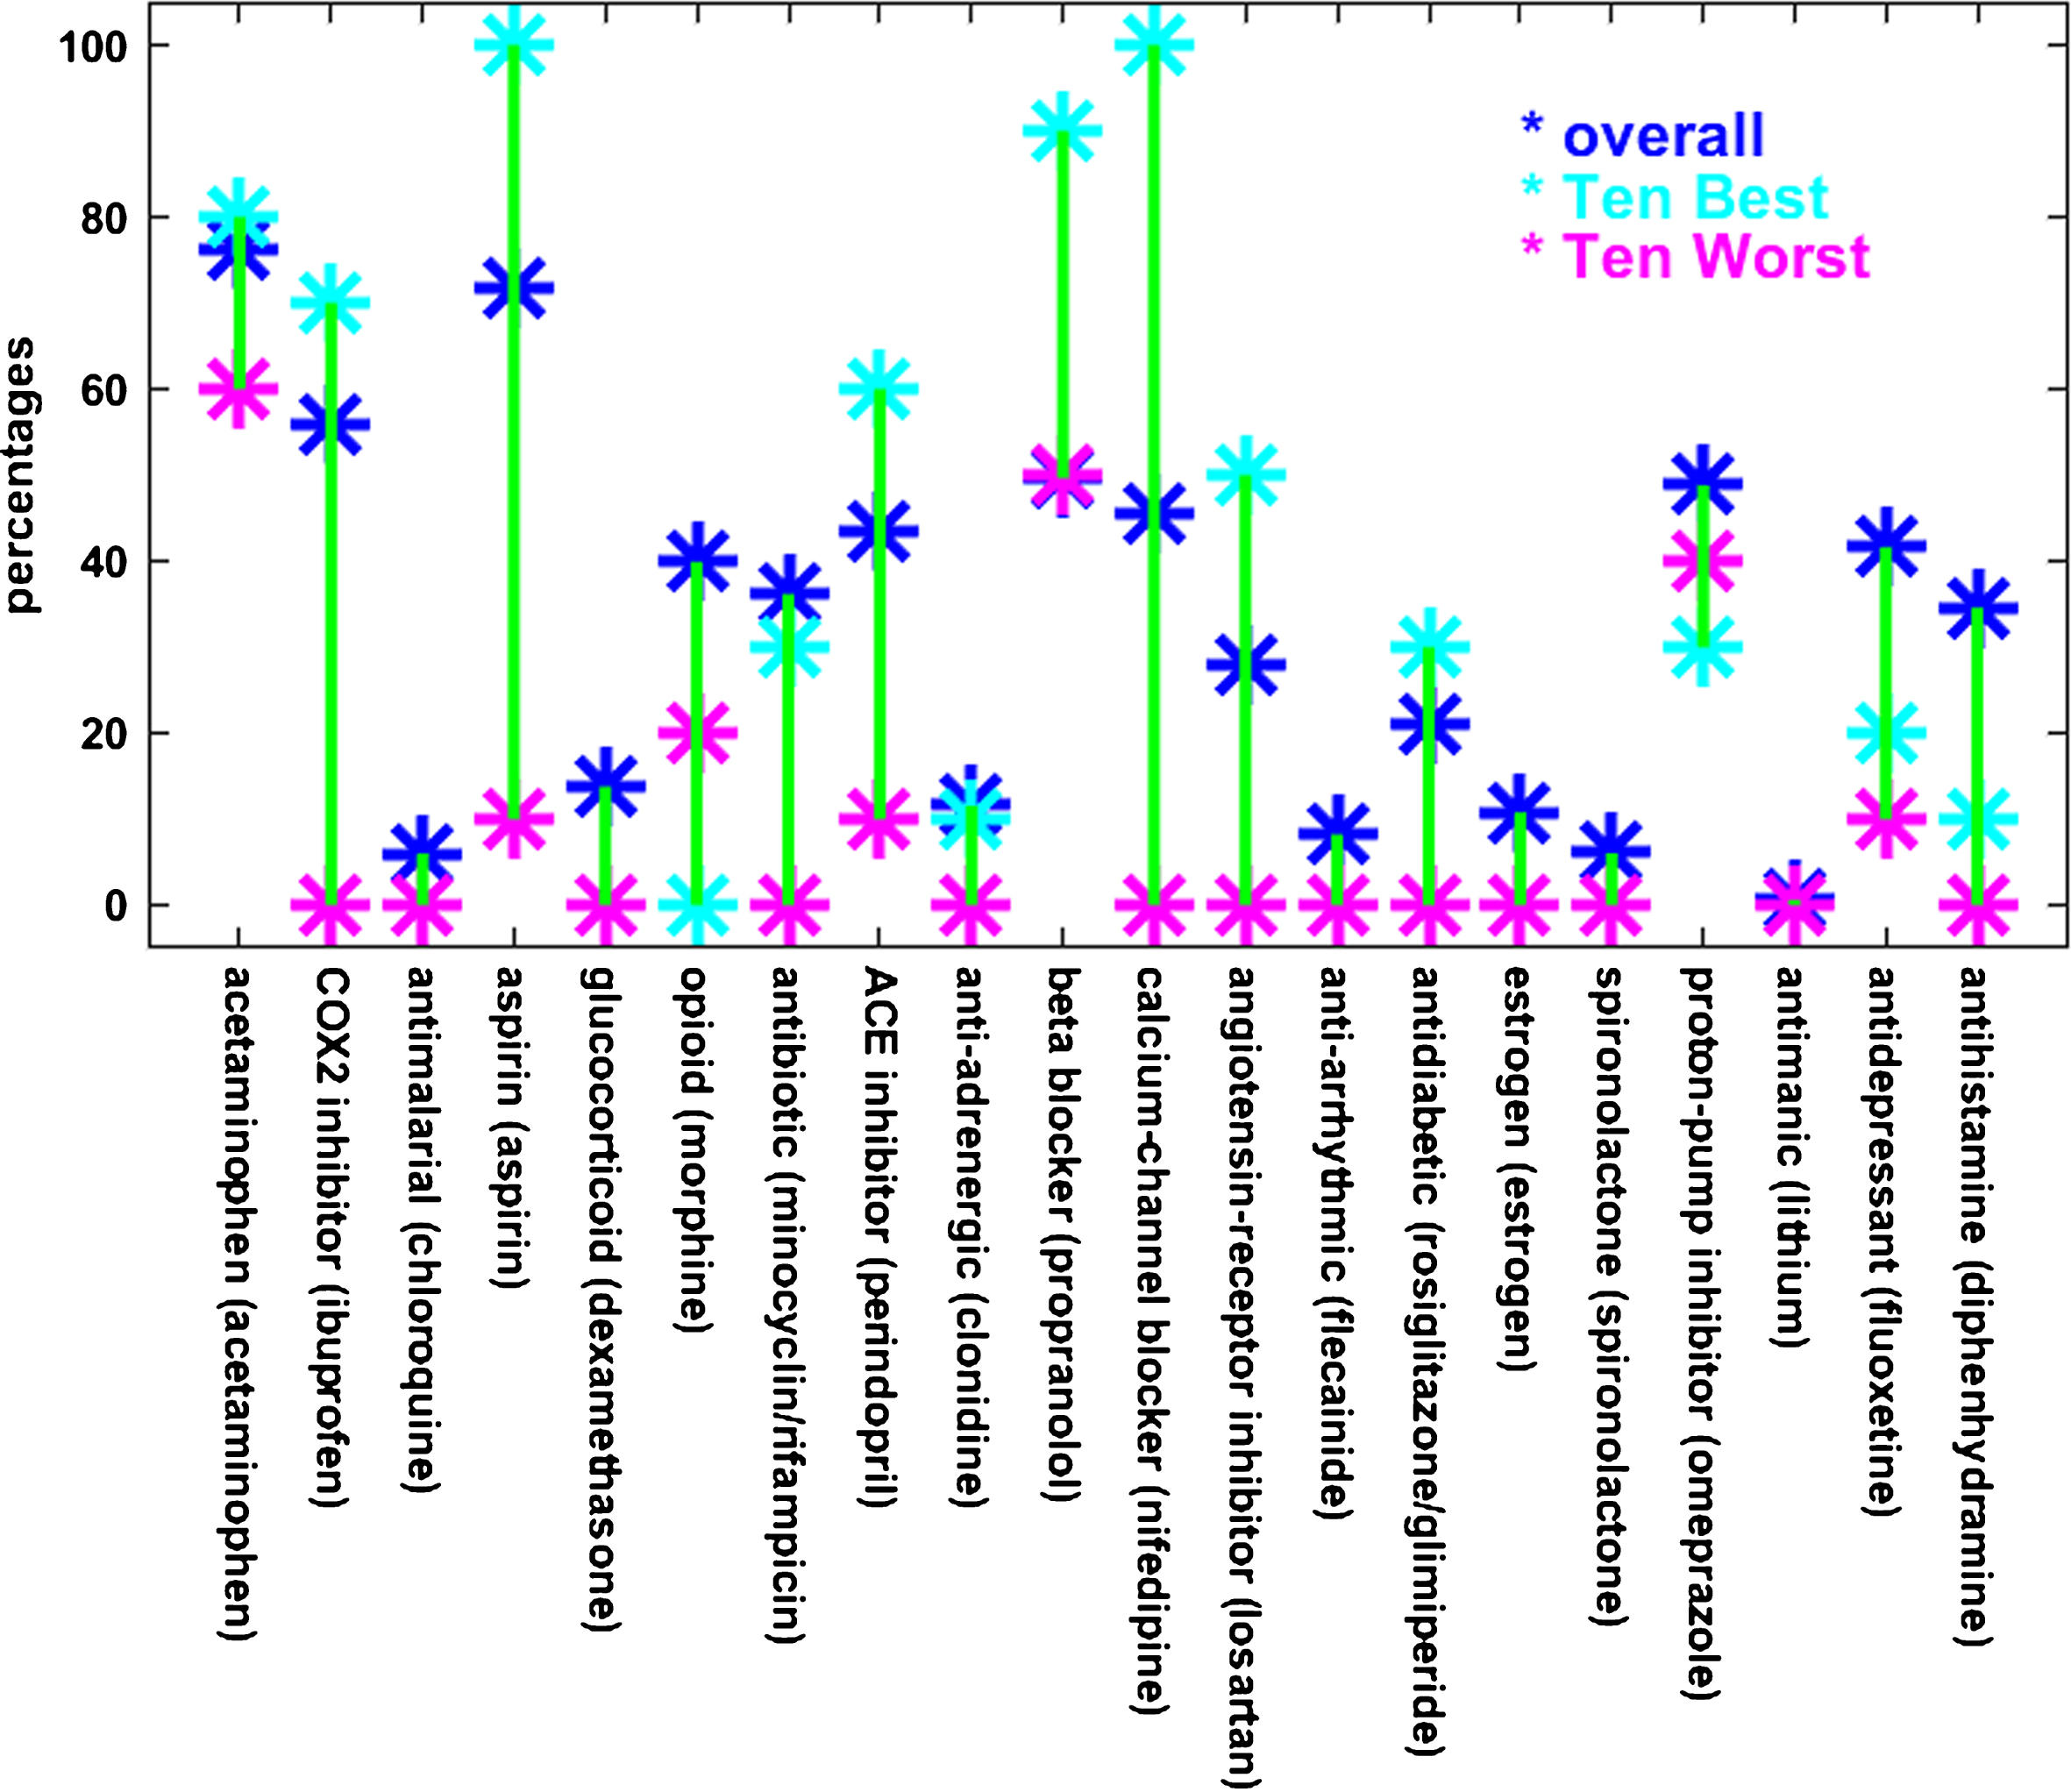 The percentages of drugs that appear in the Ten Best and Ten Worst combinations are different from their overall percentages. This is especially true for aspirin and calcium-channel blockers, which appear at much higher percentages than overall in the Ten Best combinations and at much lower percentages than overall in the Ten Worst combinations. A similar but less pronounced relationship is observed for COX2 inhibitors, ACE inhibitors, and angiotensin-receptor blockers. The reverse relationship holds for the opioids. The labels along the bottom are similar to the RADC drug category designations, followed by the name of the specific drug included in the MG model to represent that category. Note that the MG model included both minocycline and rifampicin for the antibiotic RADC category, and both rosiglitazone and glimepiride for the antidiabetic category, and the averaged outputs for each pair of drugs represented the response of the model for the corresponding category.